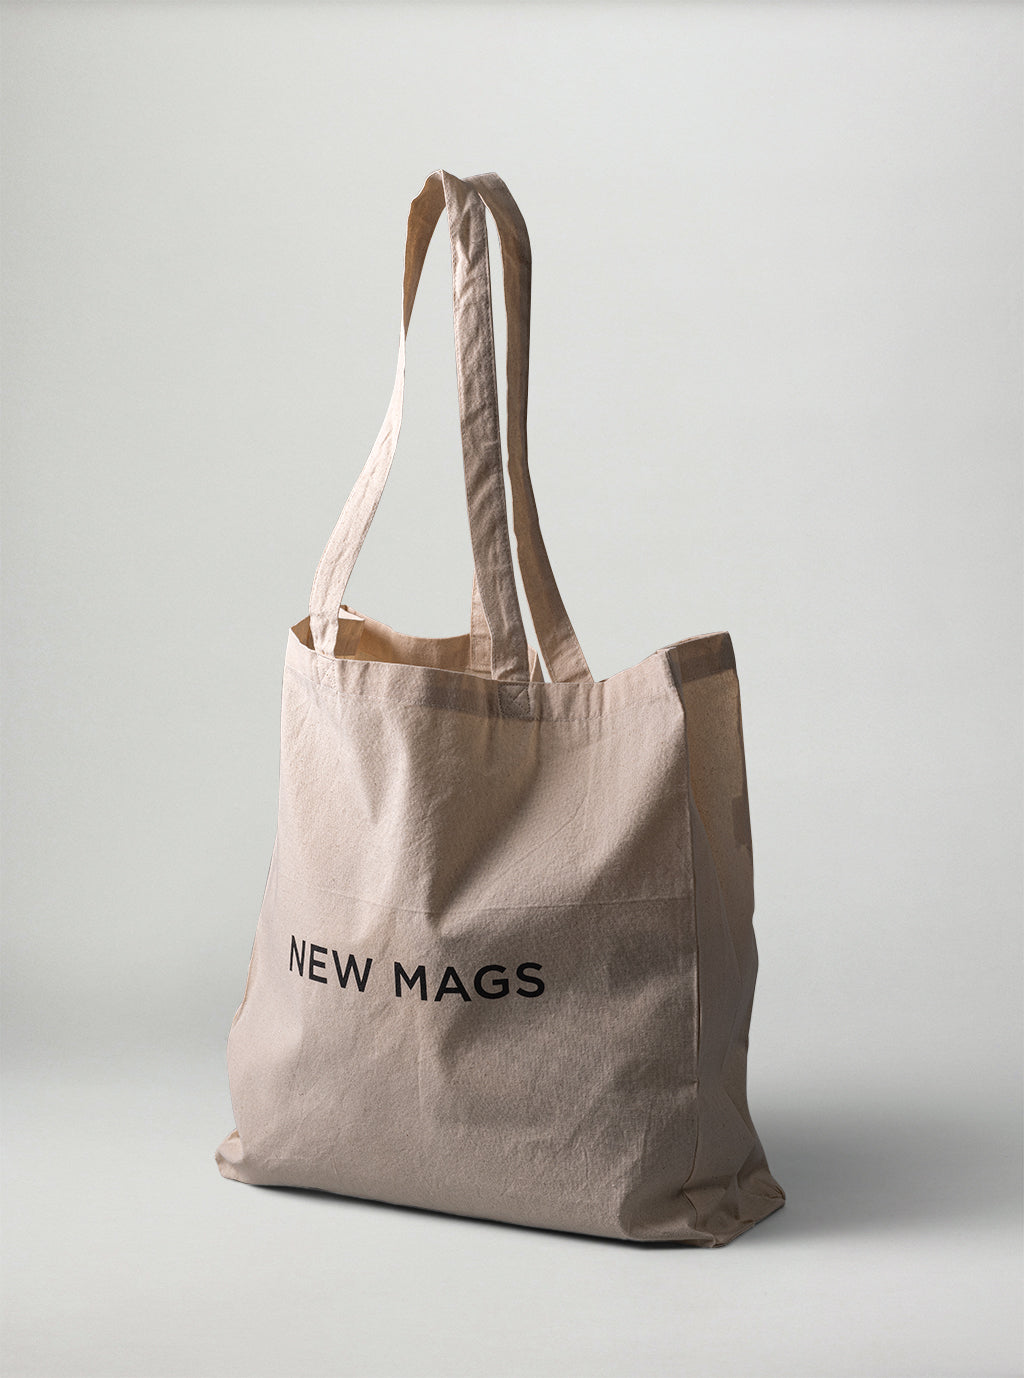 New Mags Tote Bag